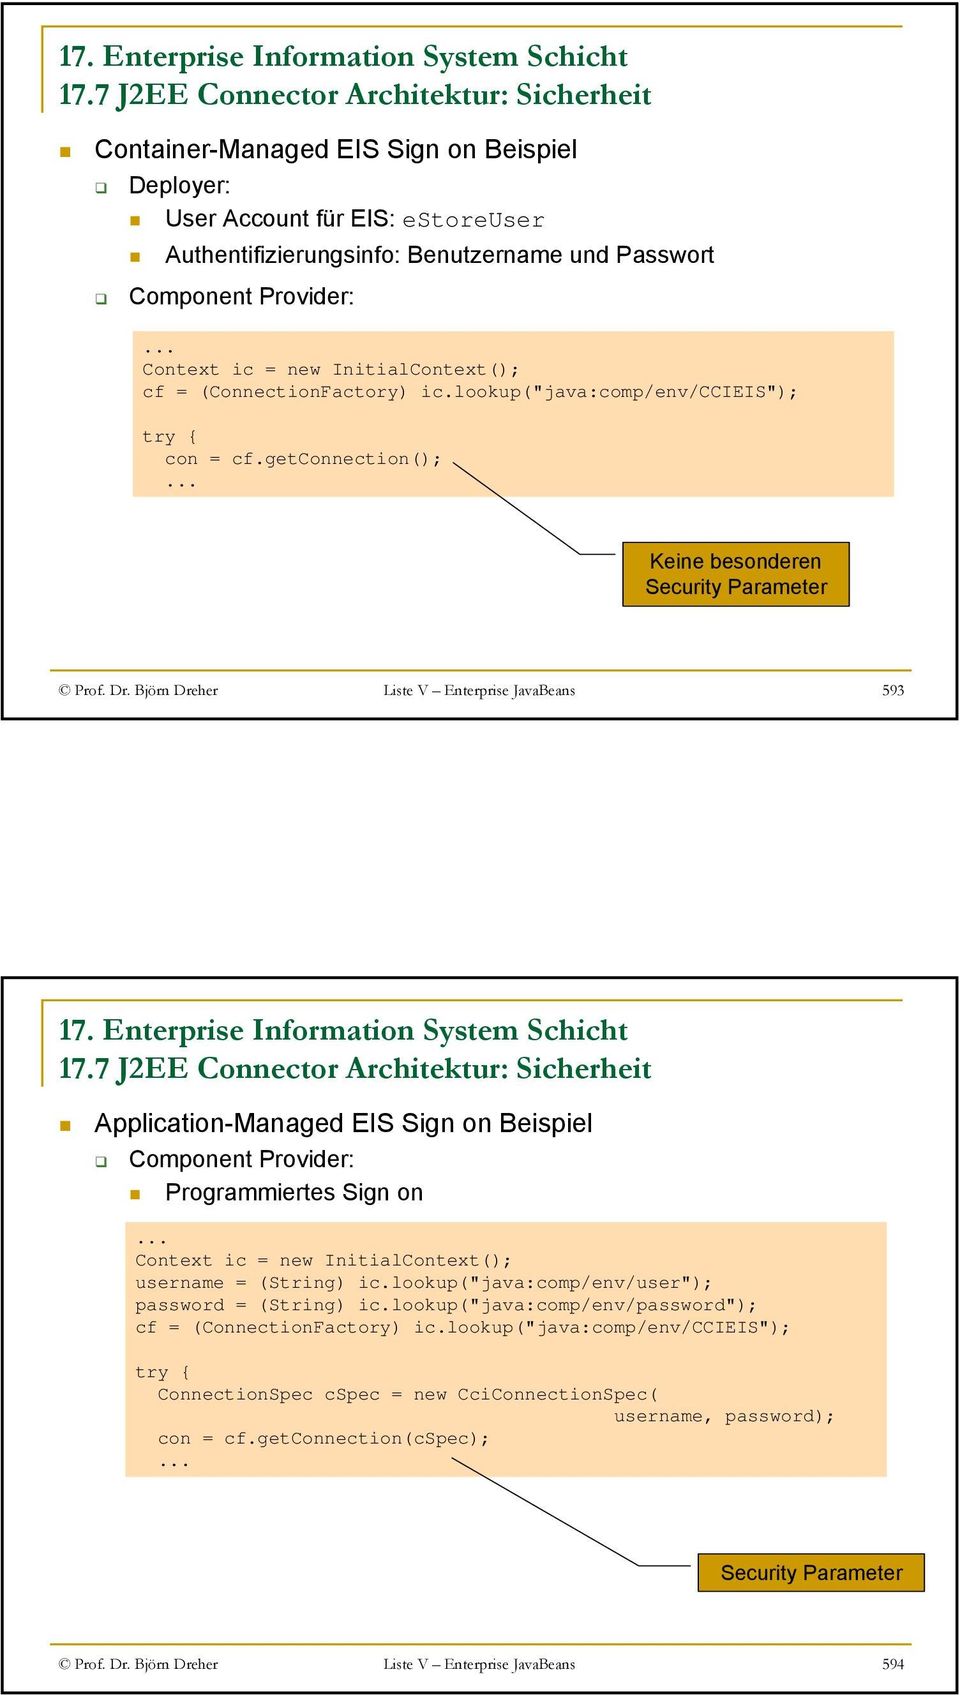 Björn Dreher Liste V Enterprise JavaBeans 593 Application-Managed EIS Sign on Beispiel Component Provider: Programmiertes Sign on Context ic = new InitialContext(); username = (String) ic.